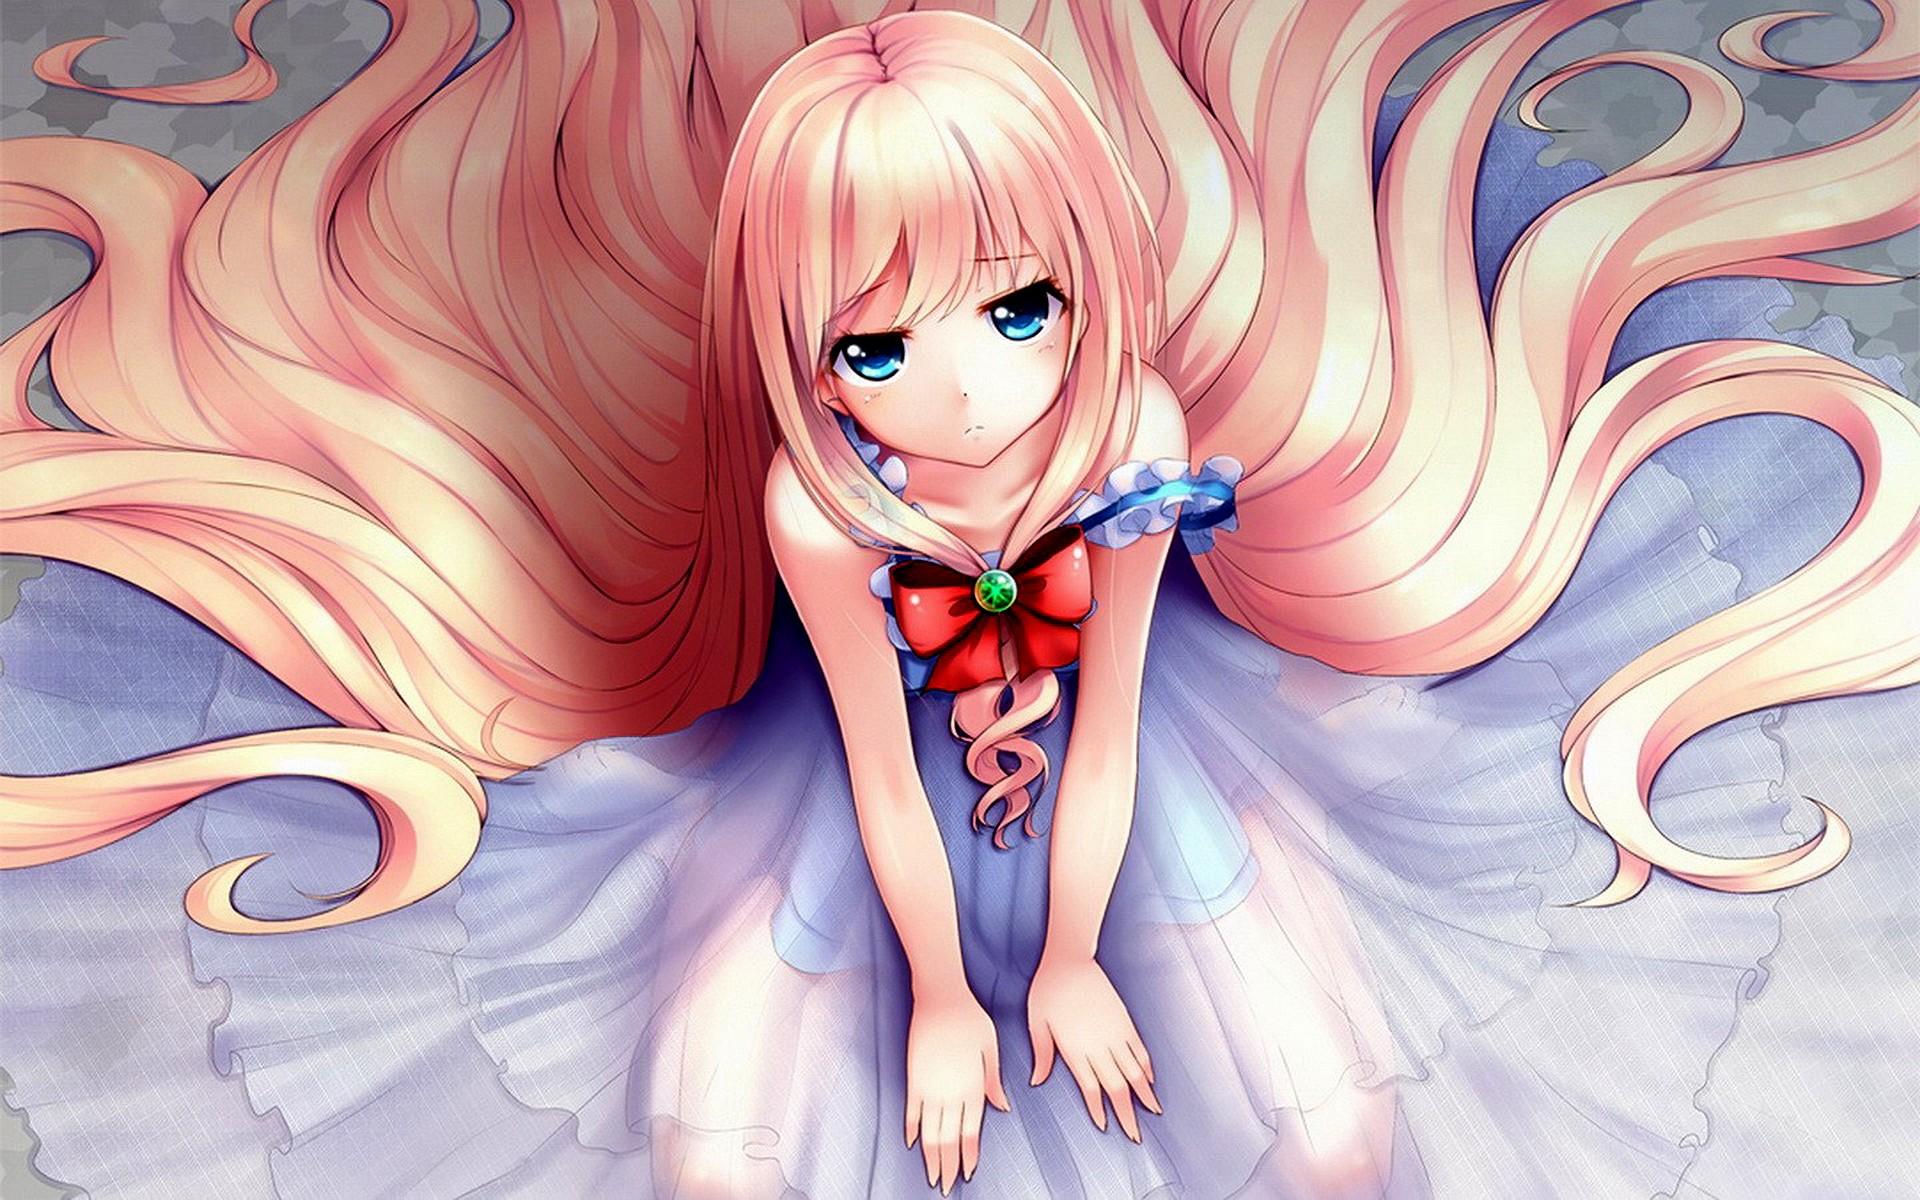 7. Anime Girl with Blue and Pink Hair Wallpaper - wide 4